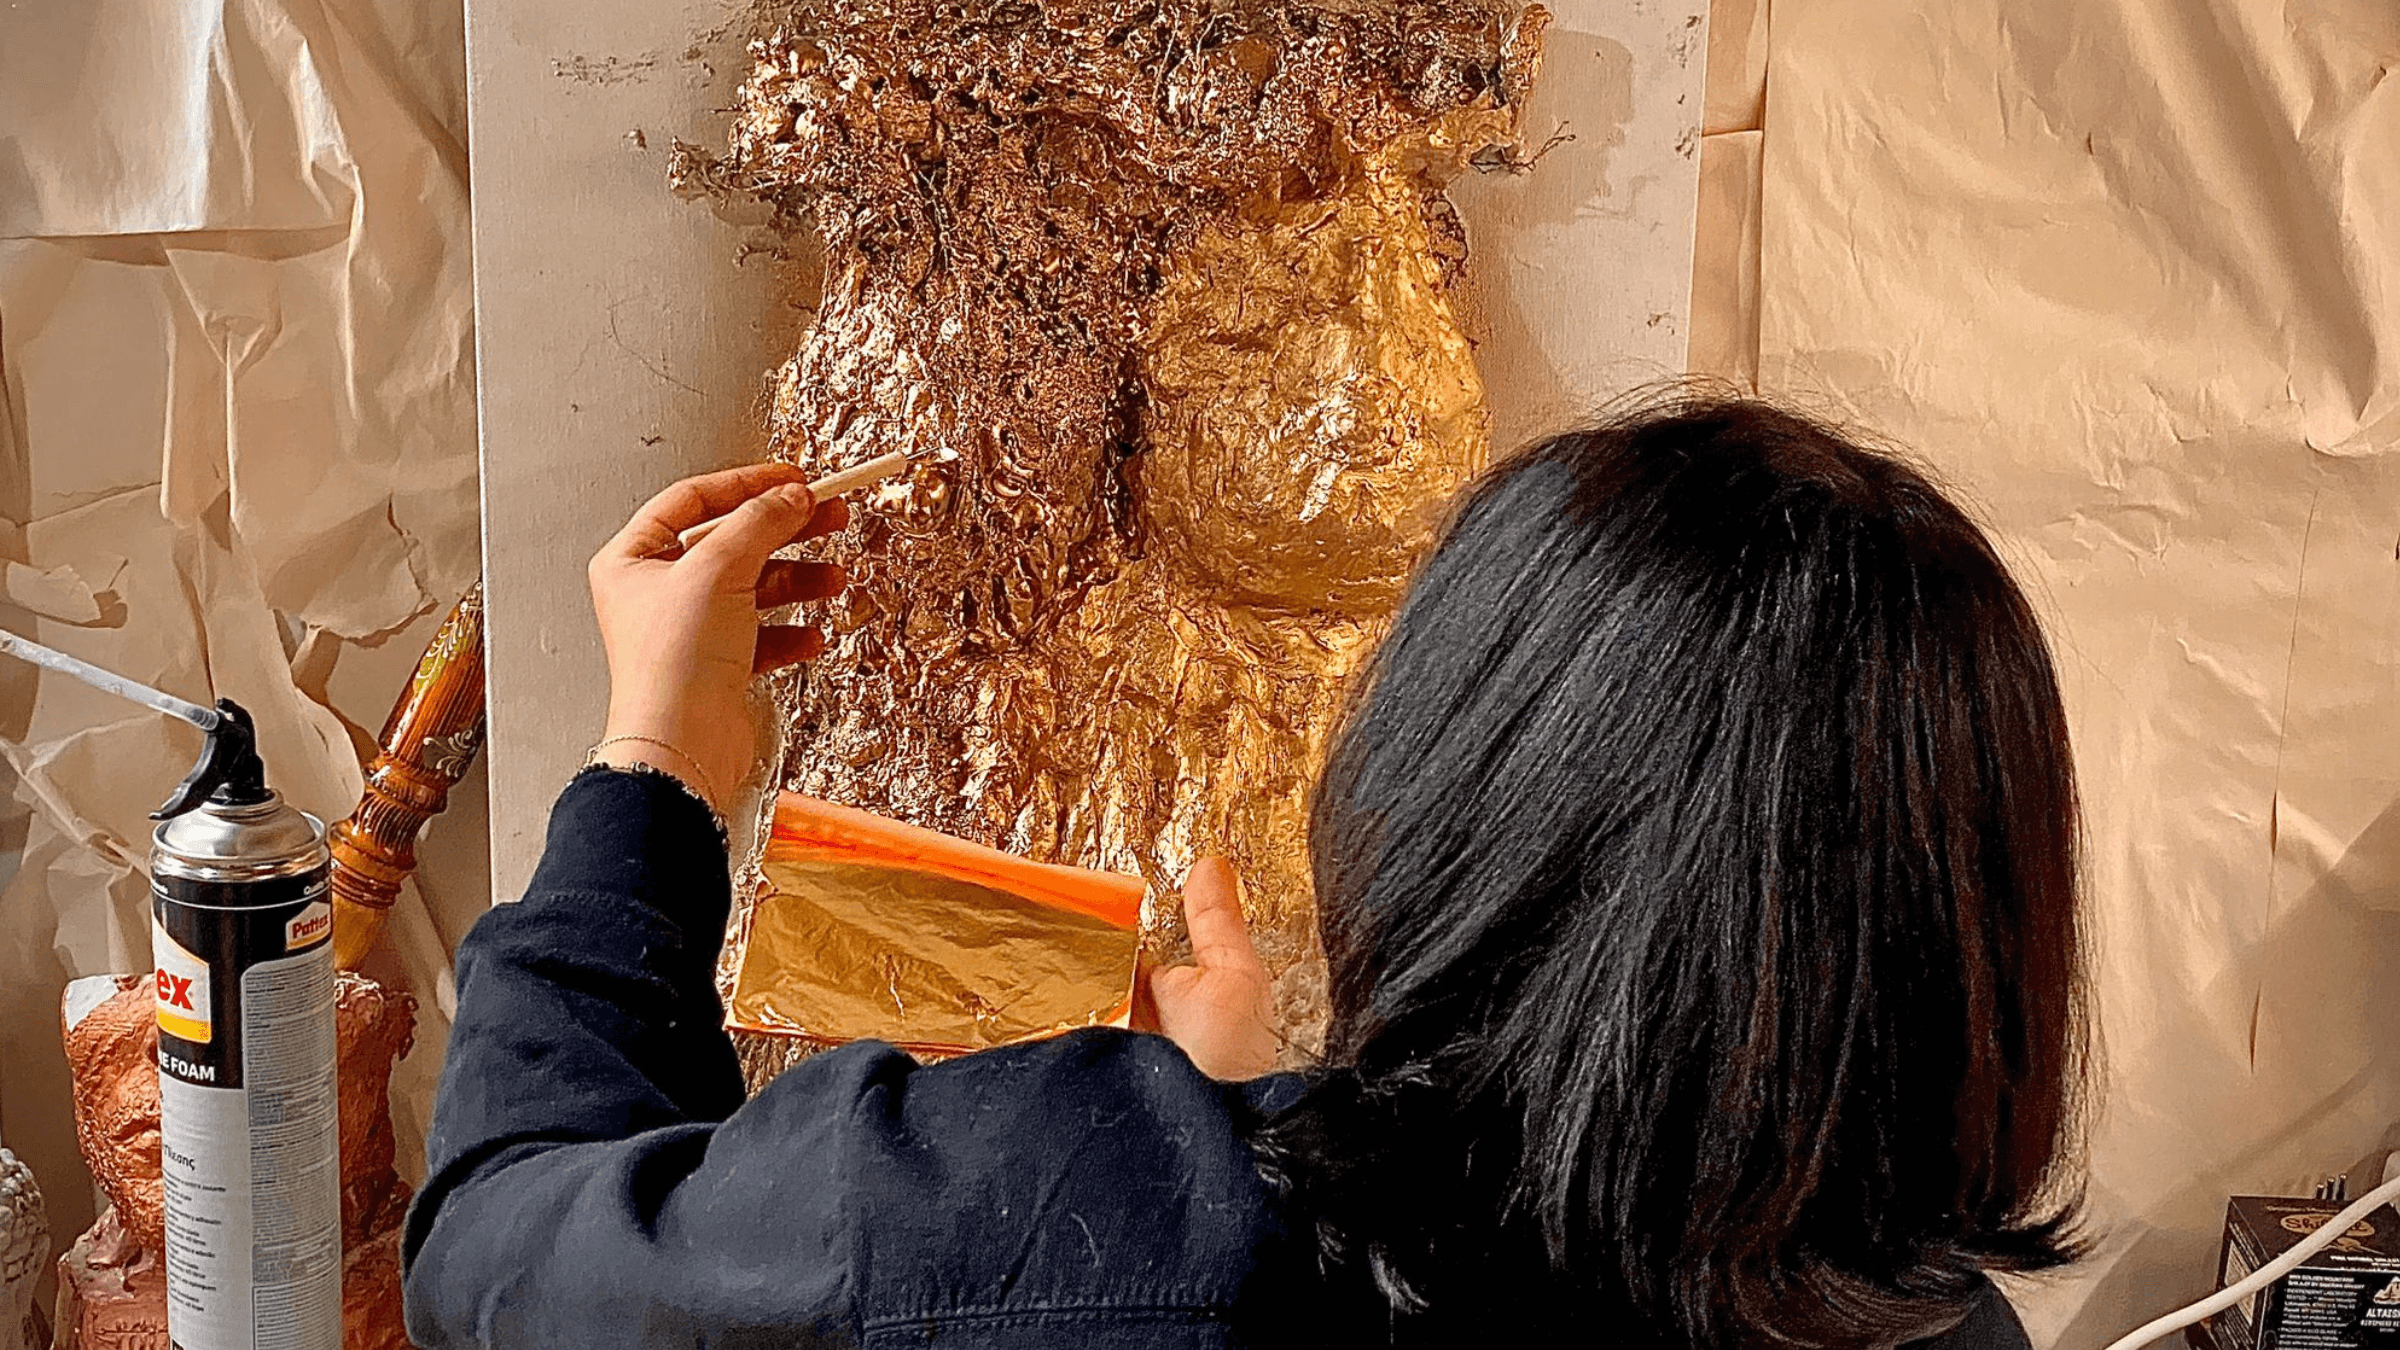 Artist Nidaa Badwan works on her new sculpture of gold leaf, inspired by the death of 22-year old Mahsa Amini. 